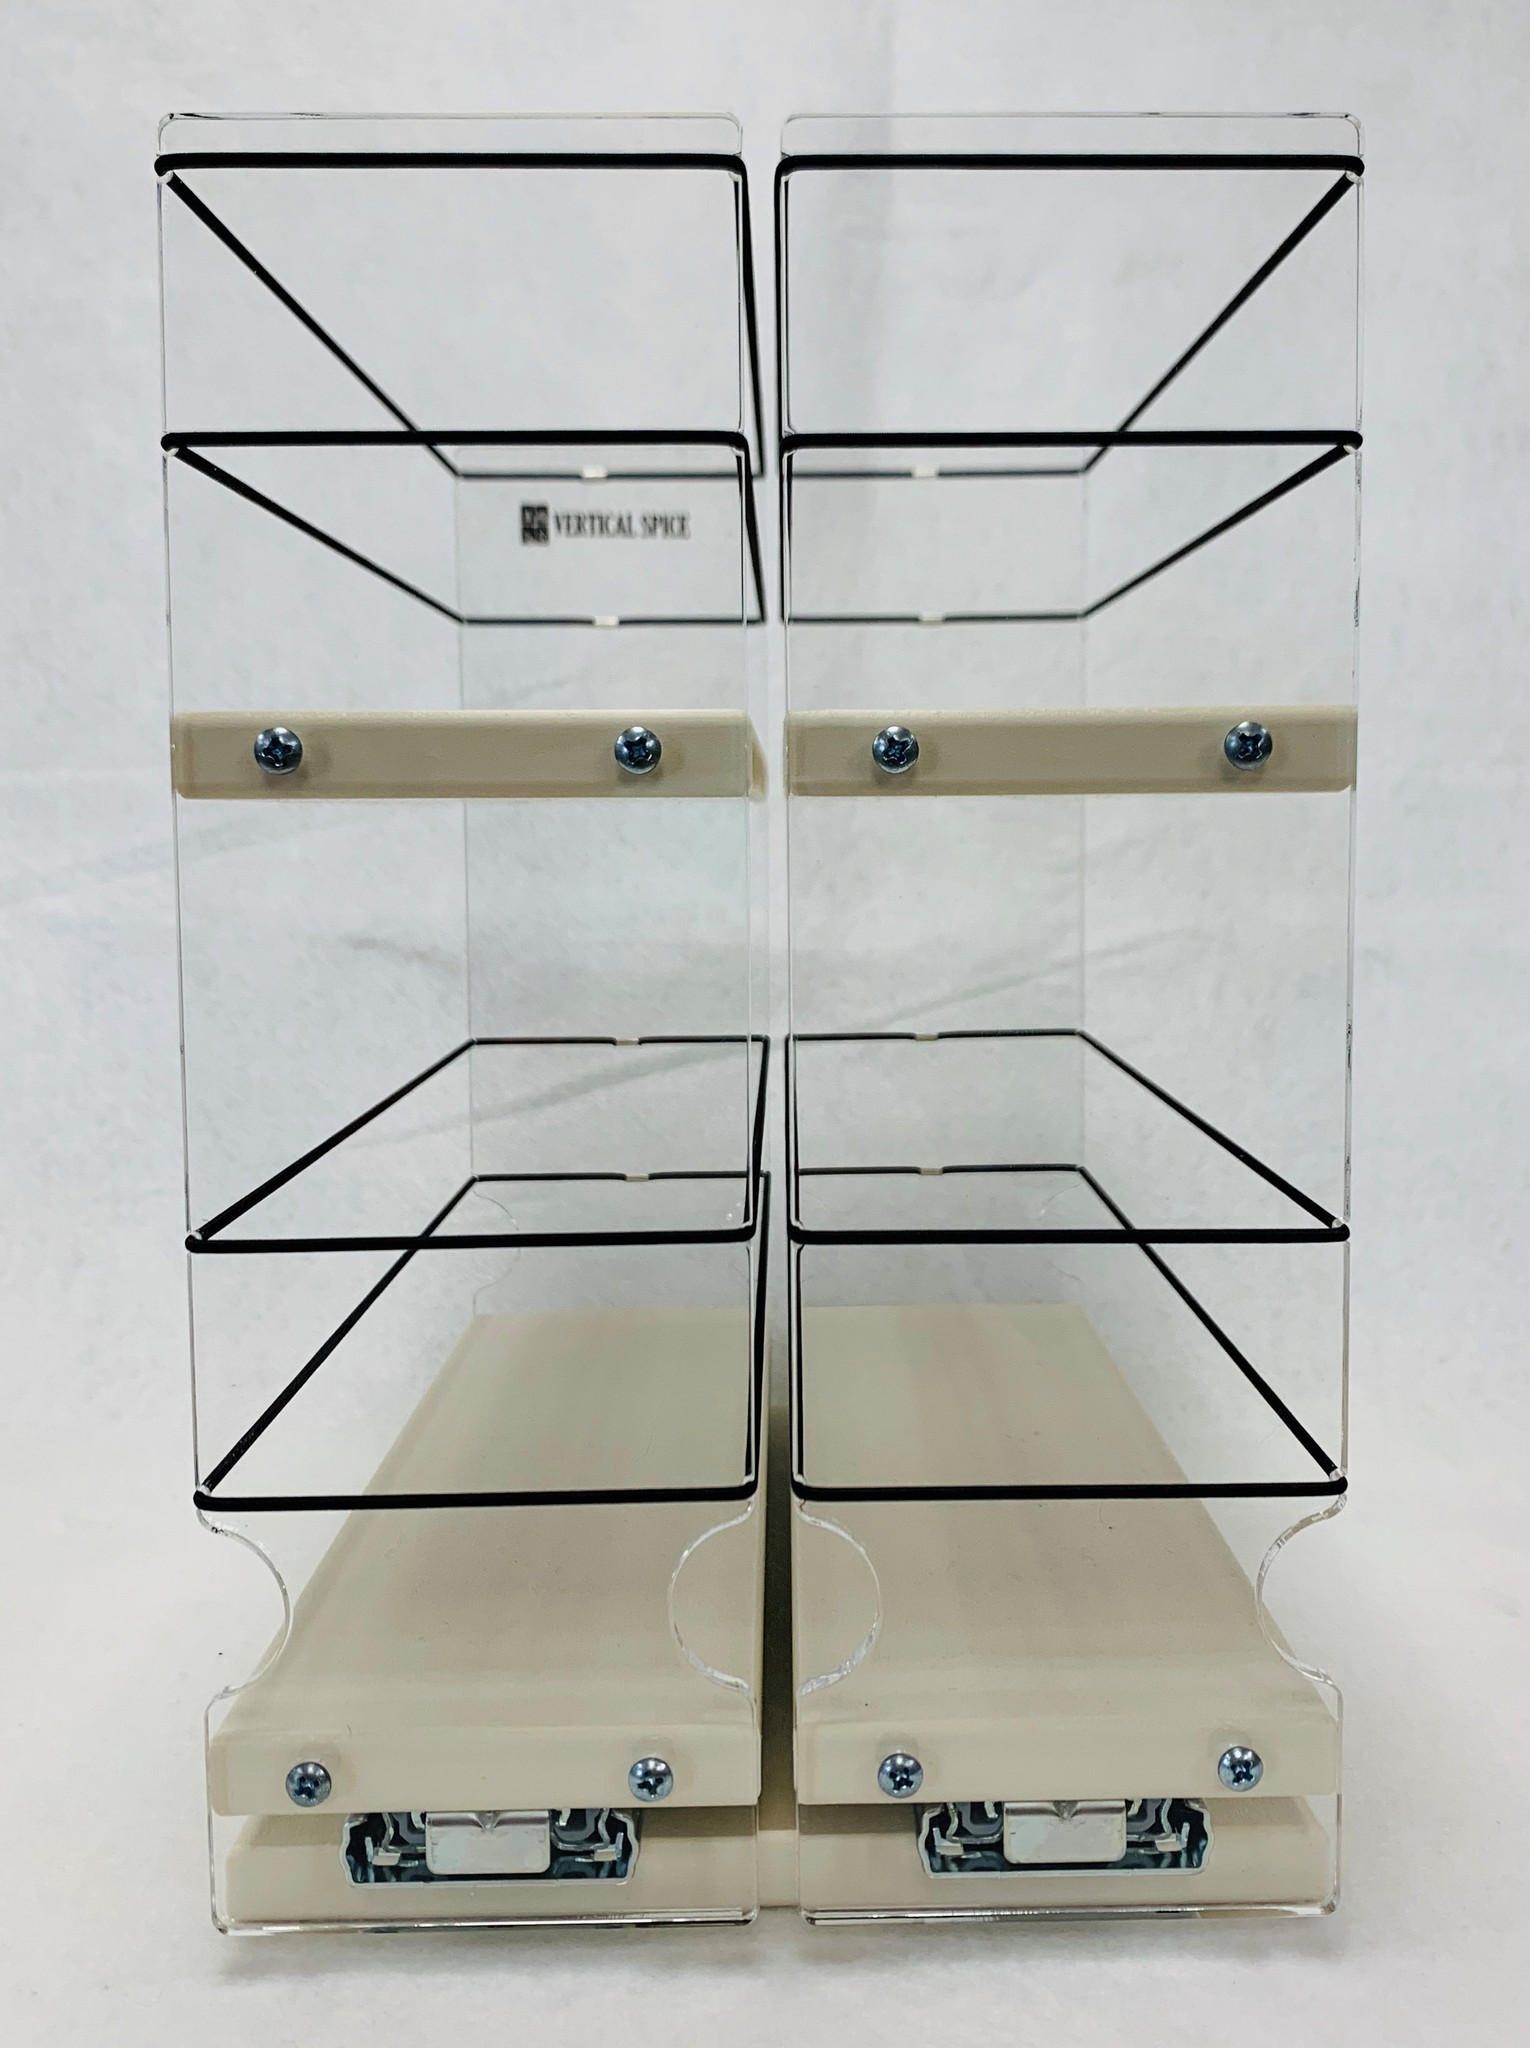 33x2TLx11 Cream Storage Solution Drawer for Large Containers